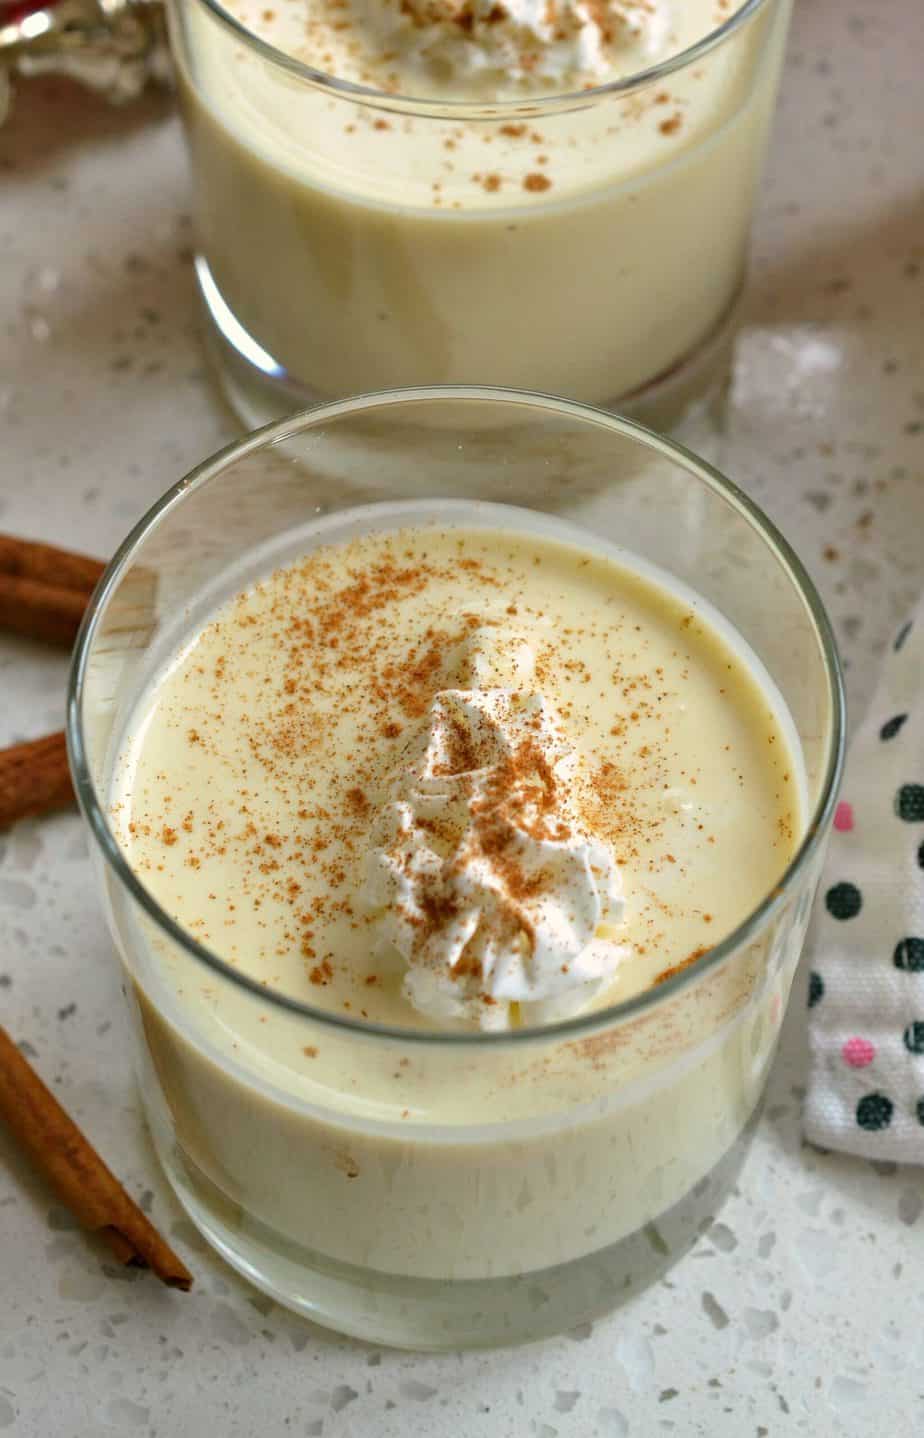 This delectable Homemade Eggnog tastes so much better than store bought. 